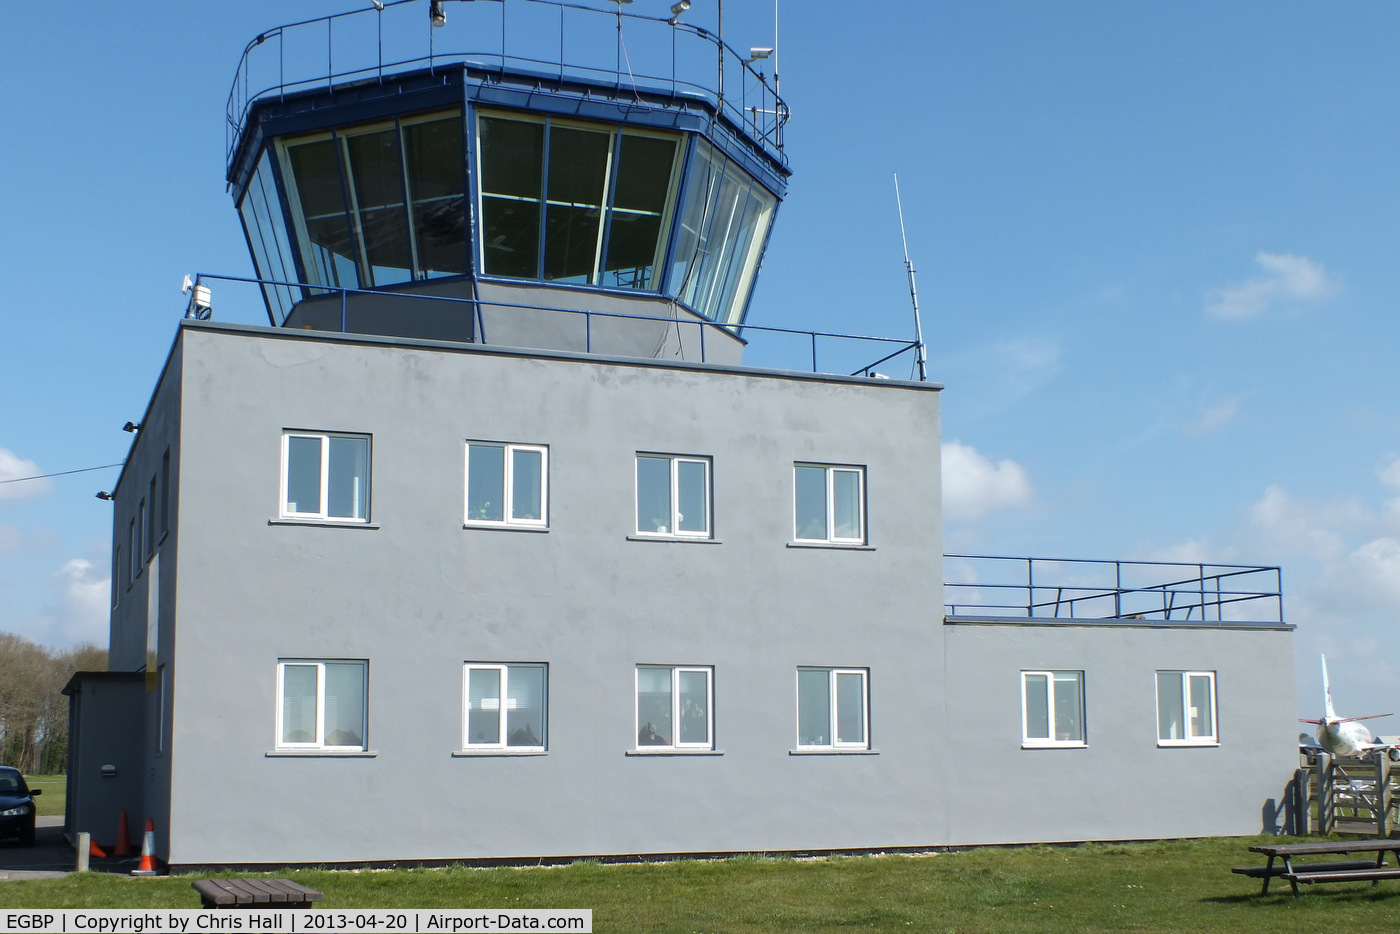 Kemble Airport, Kemble, England United Kingdom (EGBP) - Kemble's tower in the process of being repainted